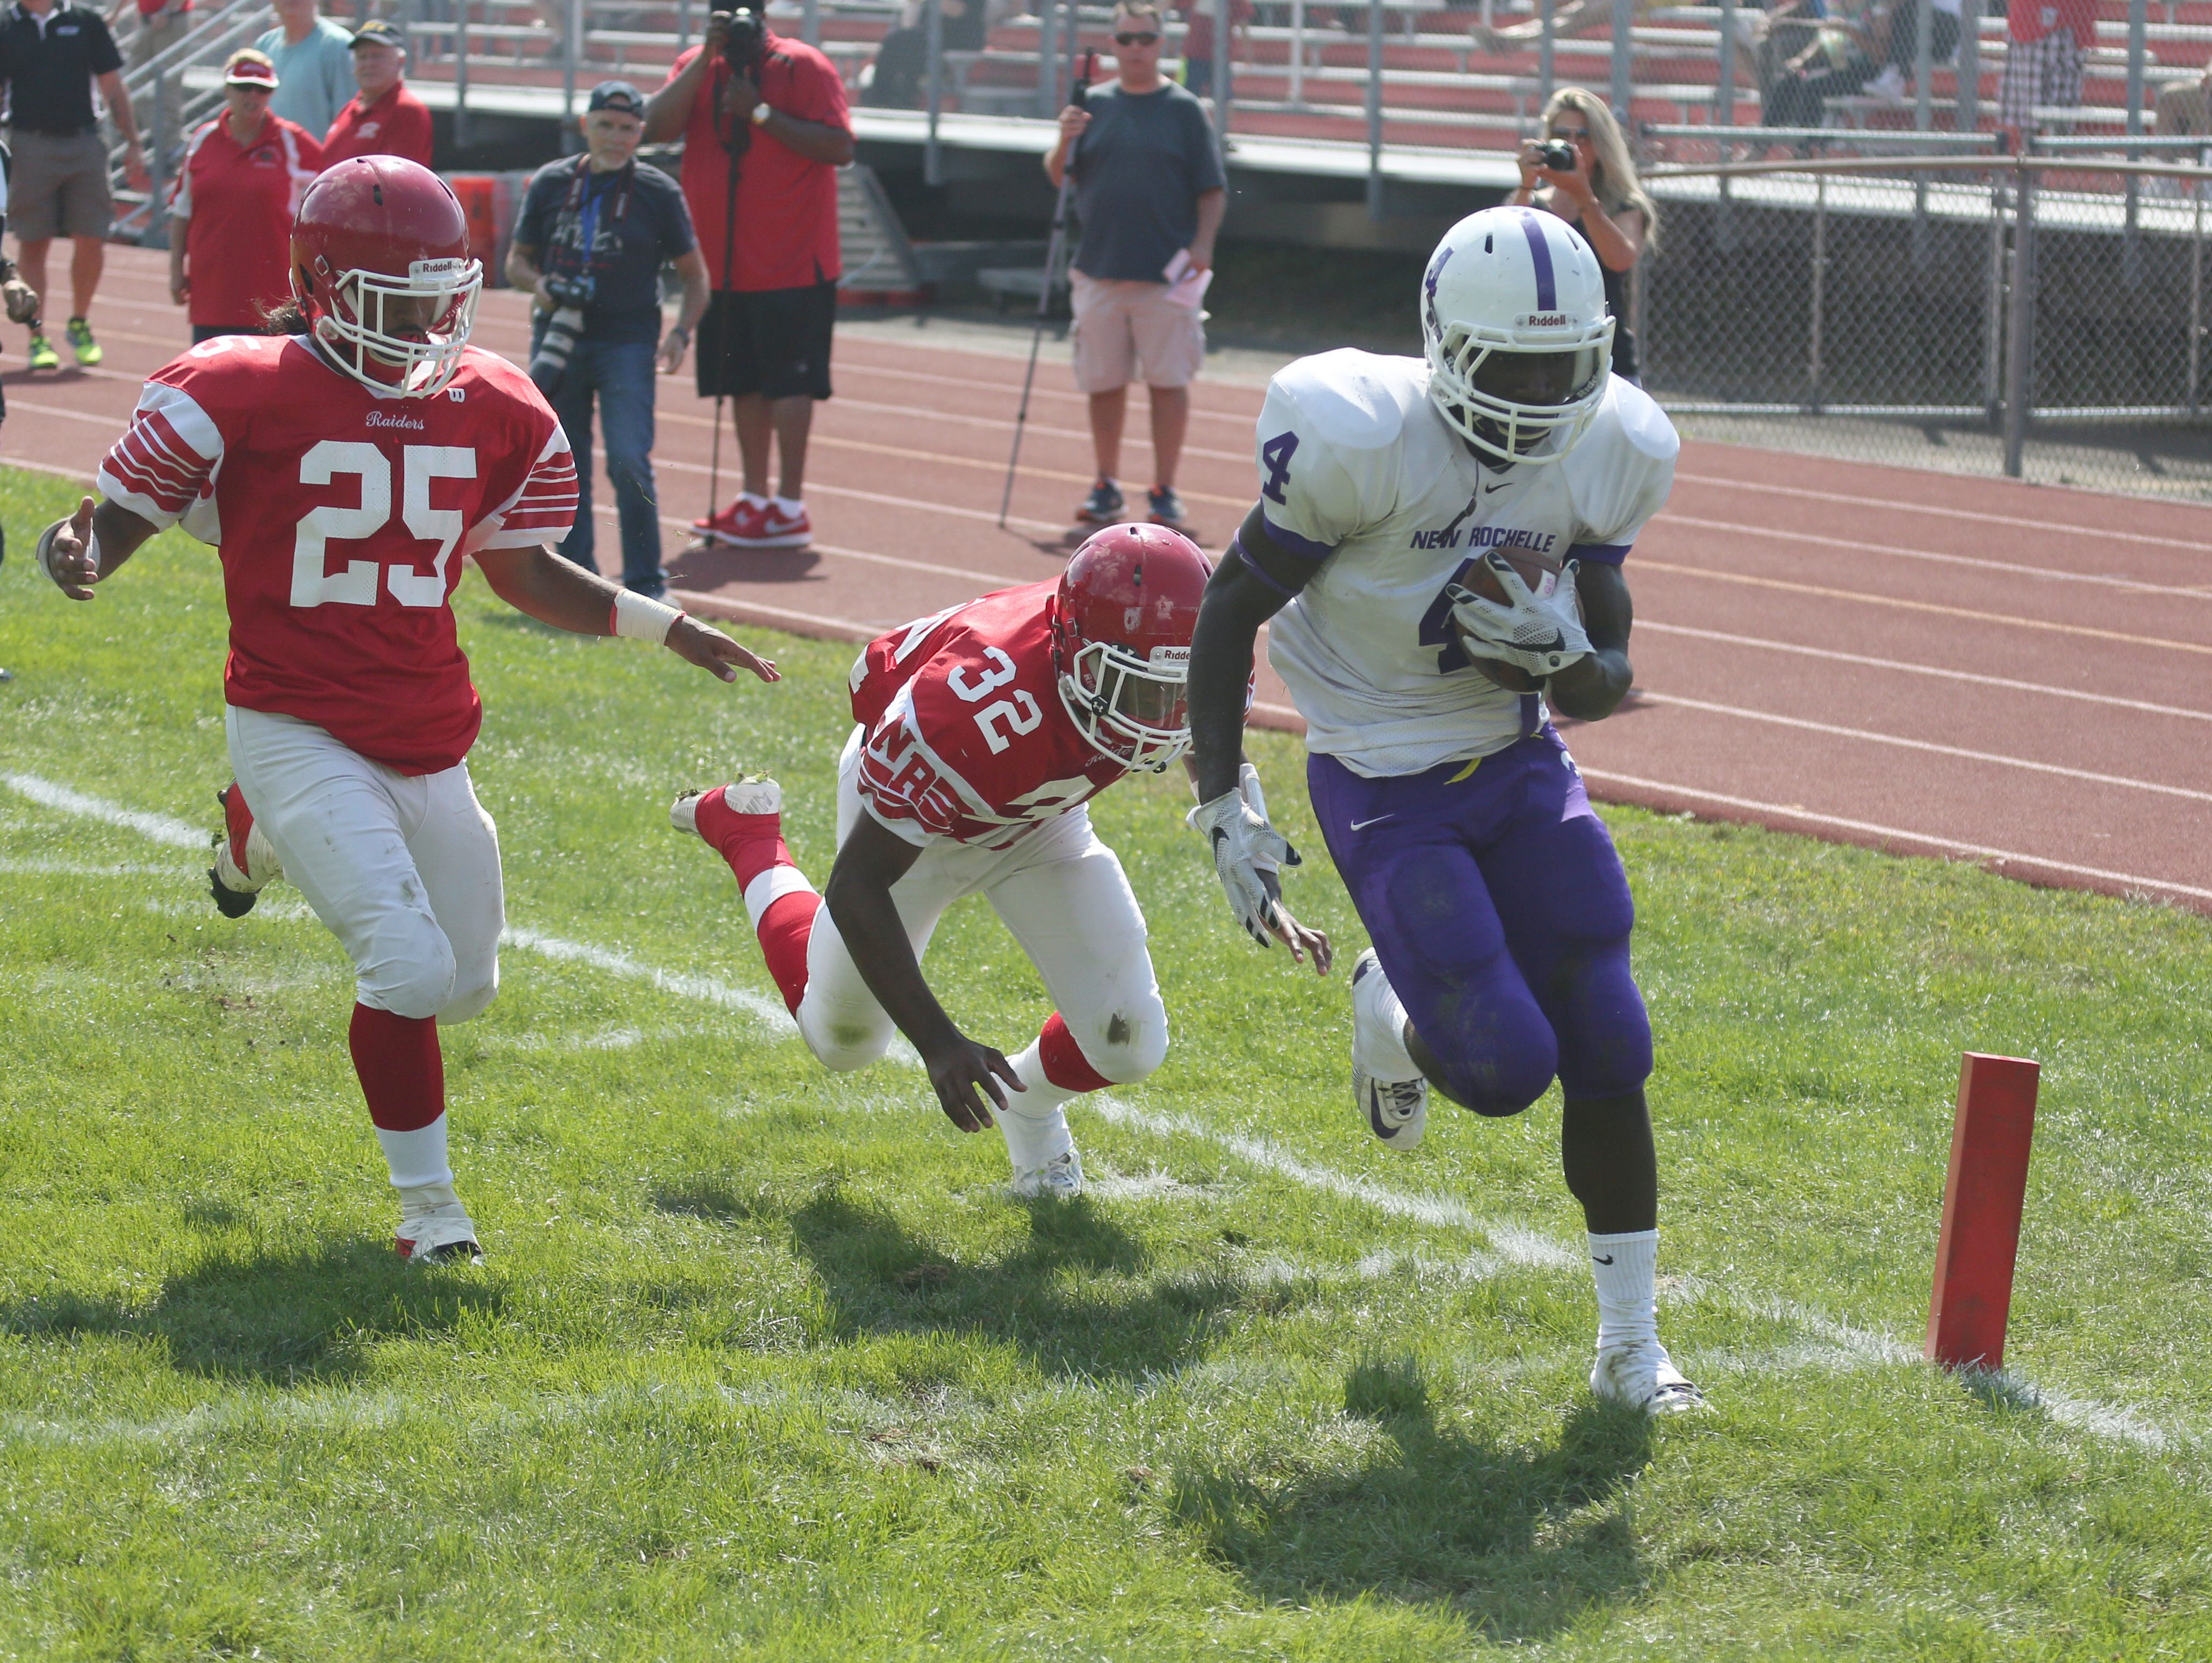 New Rochelle's Keelan Thomas scores a first half touchdown as North Rockland's Michael Cintron and Cameron Lewis follow, during action in their game at North Rockland High School, Sept. 19, 2015.